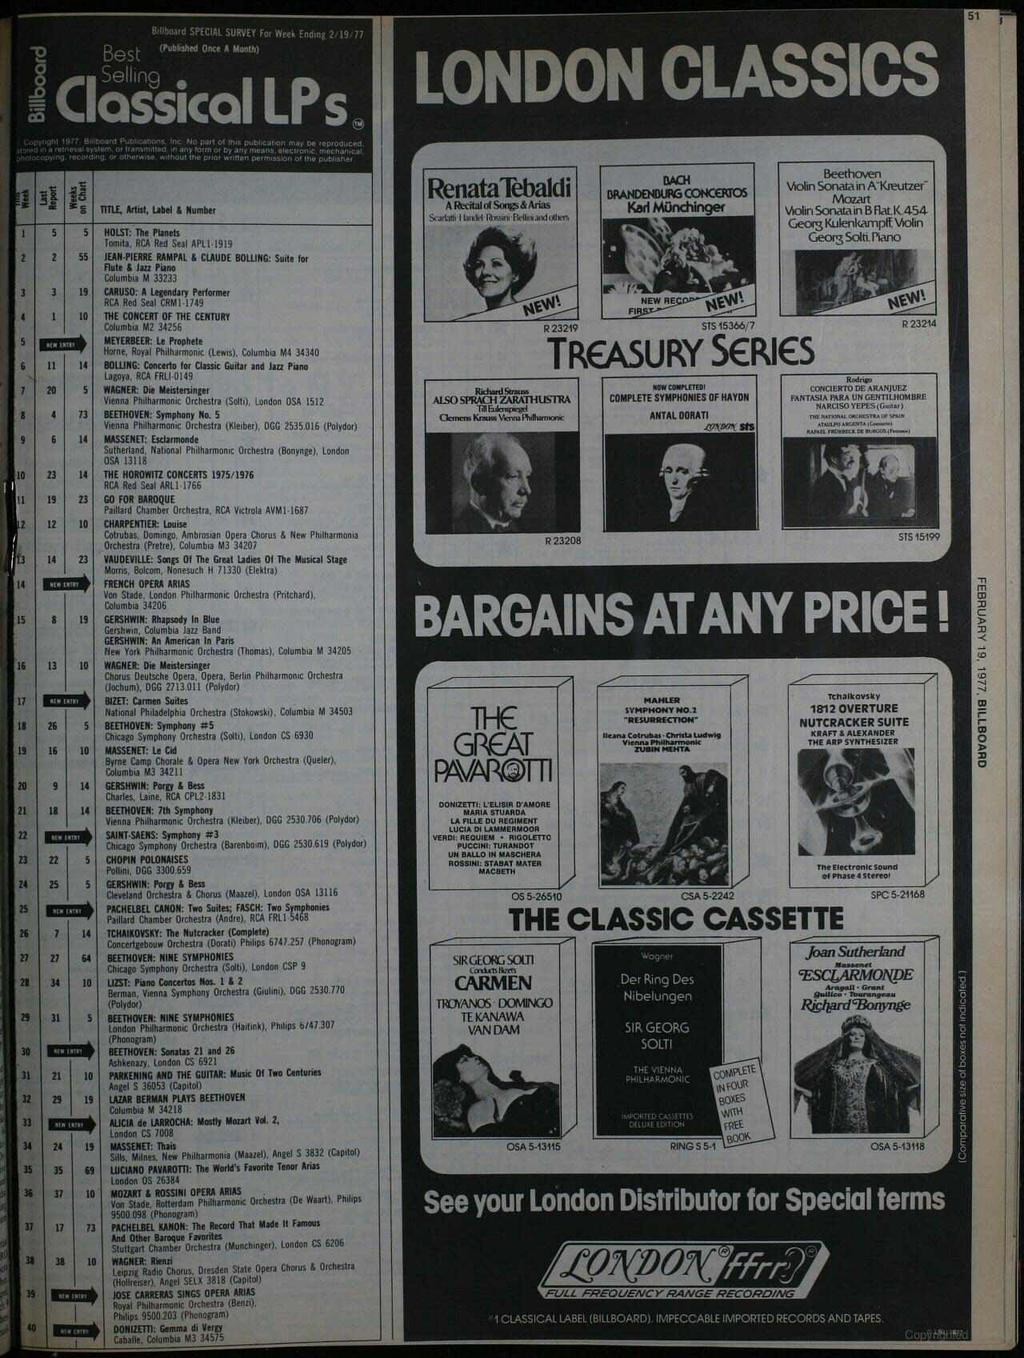 51 7- Best Billboard SPECAL SURVEY For Week Ending 2/19 +77 (Pubkshed Once A Month) Selling Classical LPs, Gopynphl 1977. Brlbaard Publications. nc No Part of his publecalren may De reproduced.